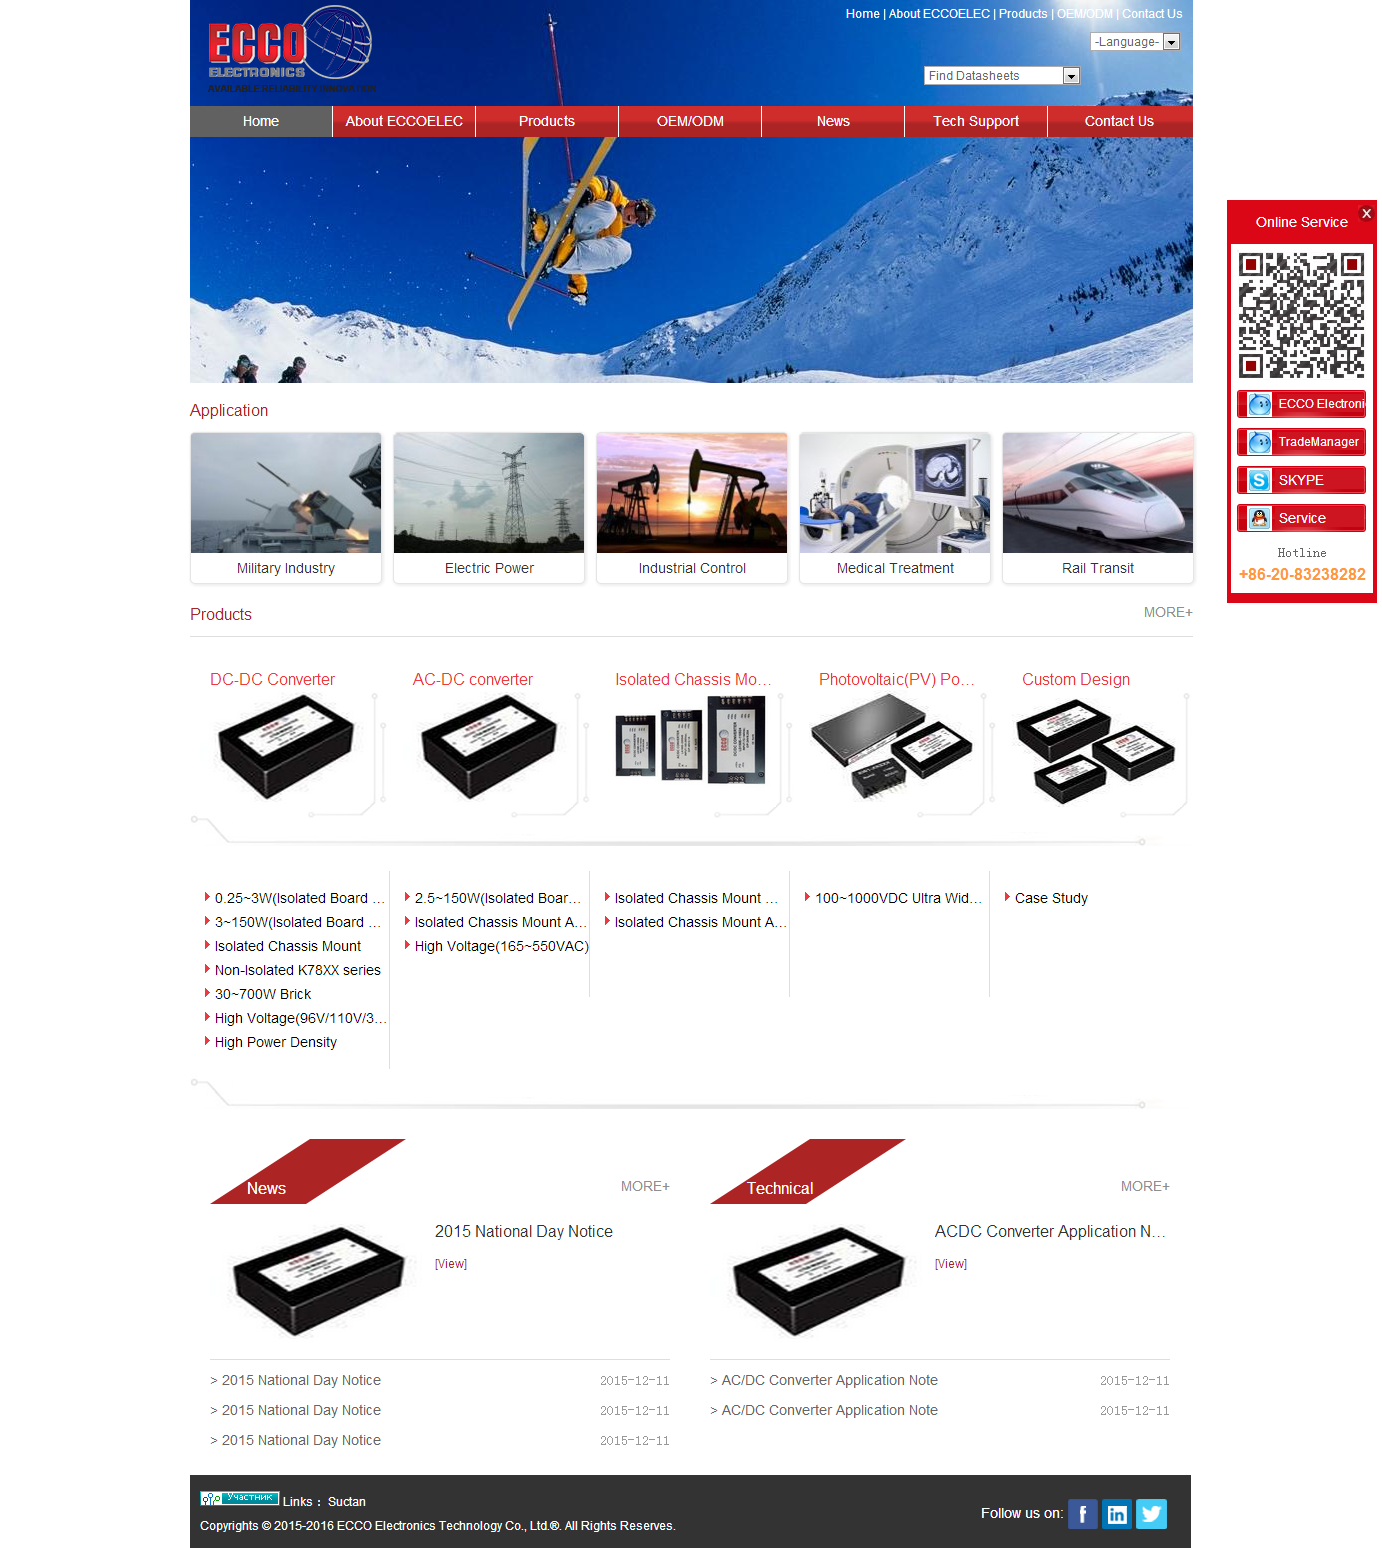 ECCO Electronics new webside has been launched